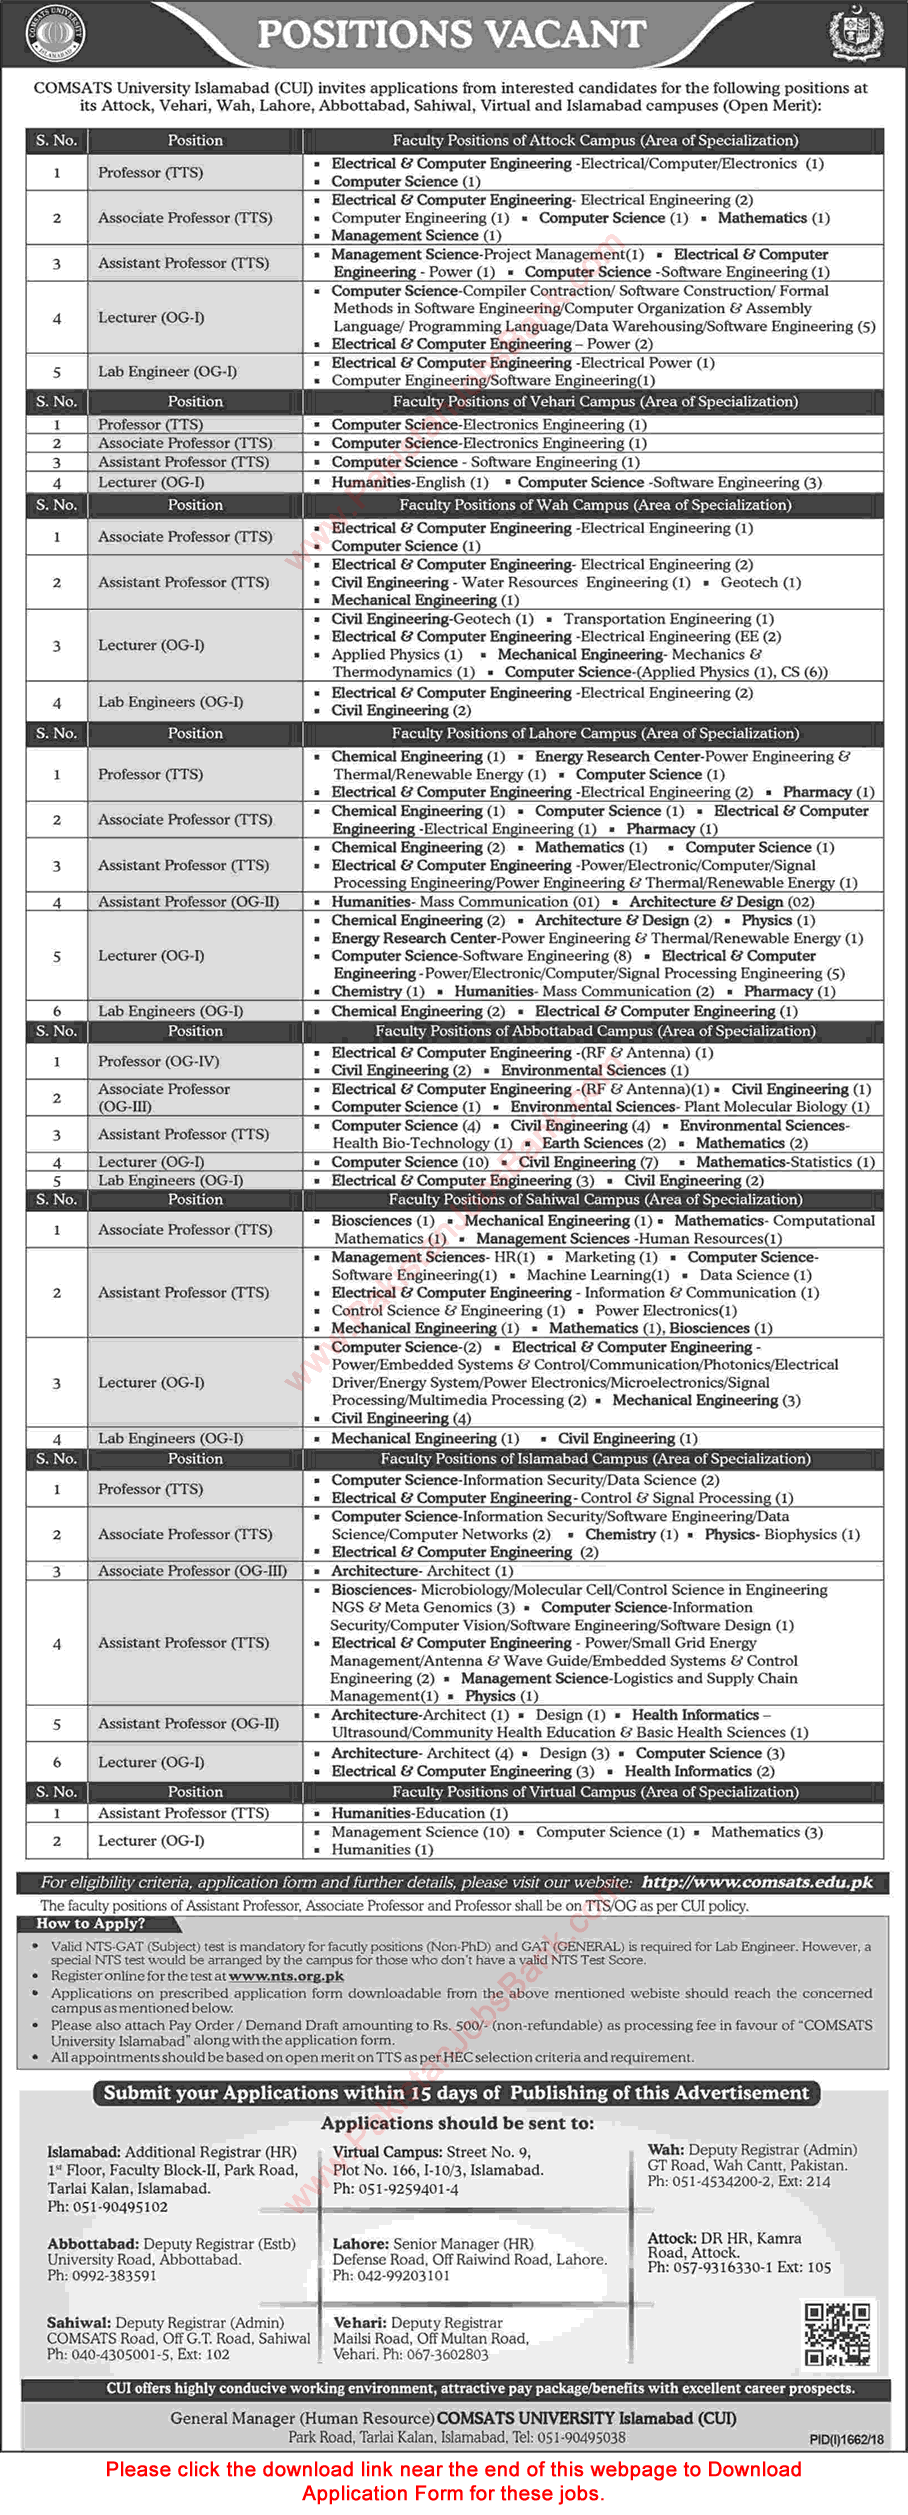 COMSATS University Islamabad Jobs October 2018 NTS Application Form Teaching Faculty & Lab Engineers Latest